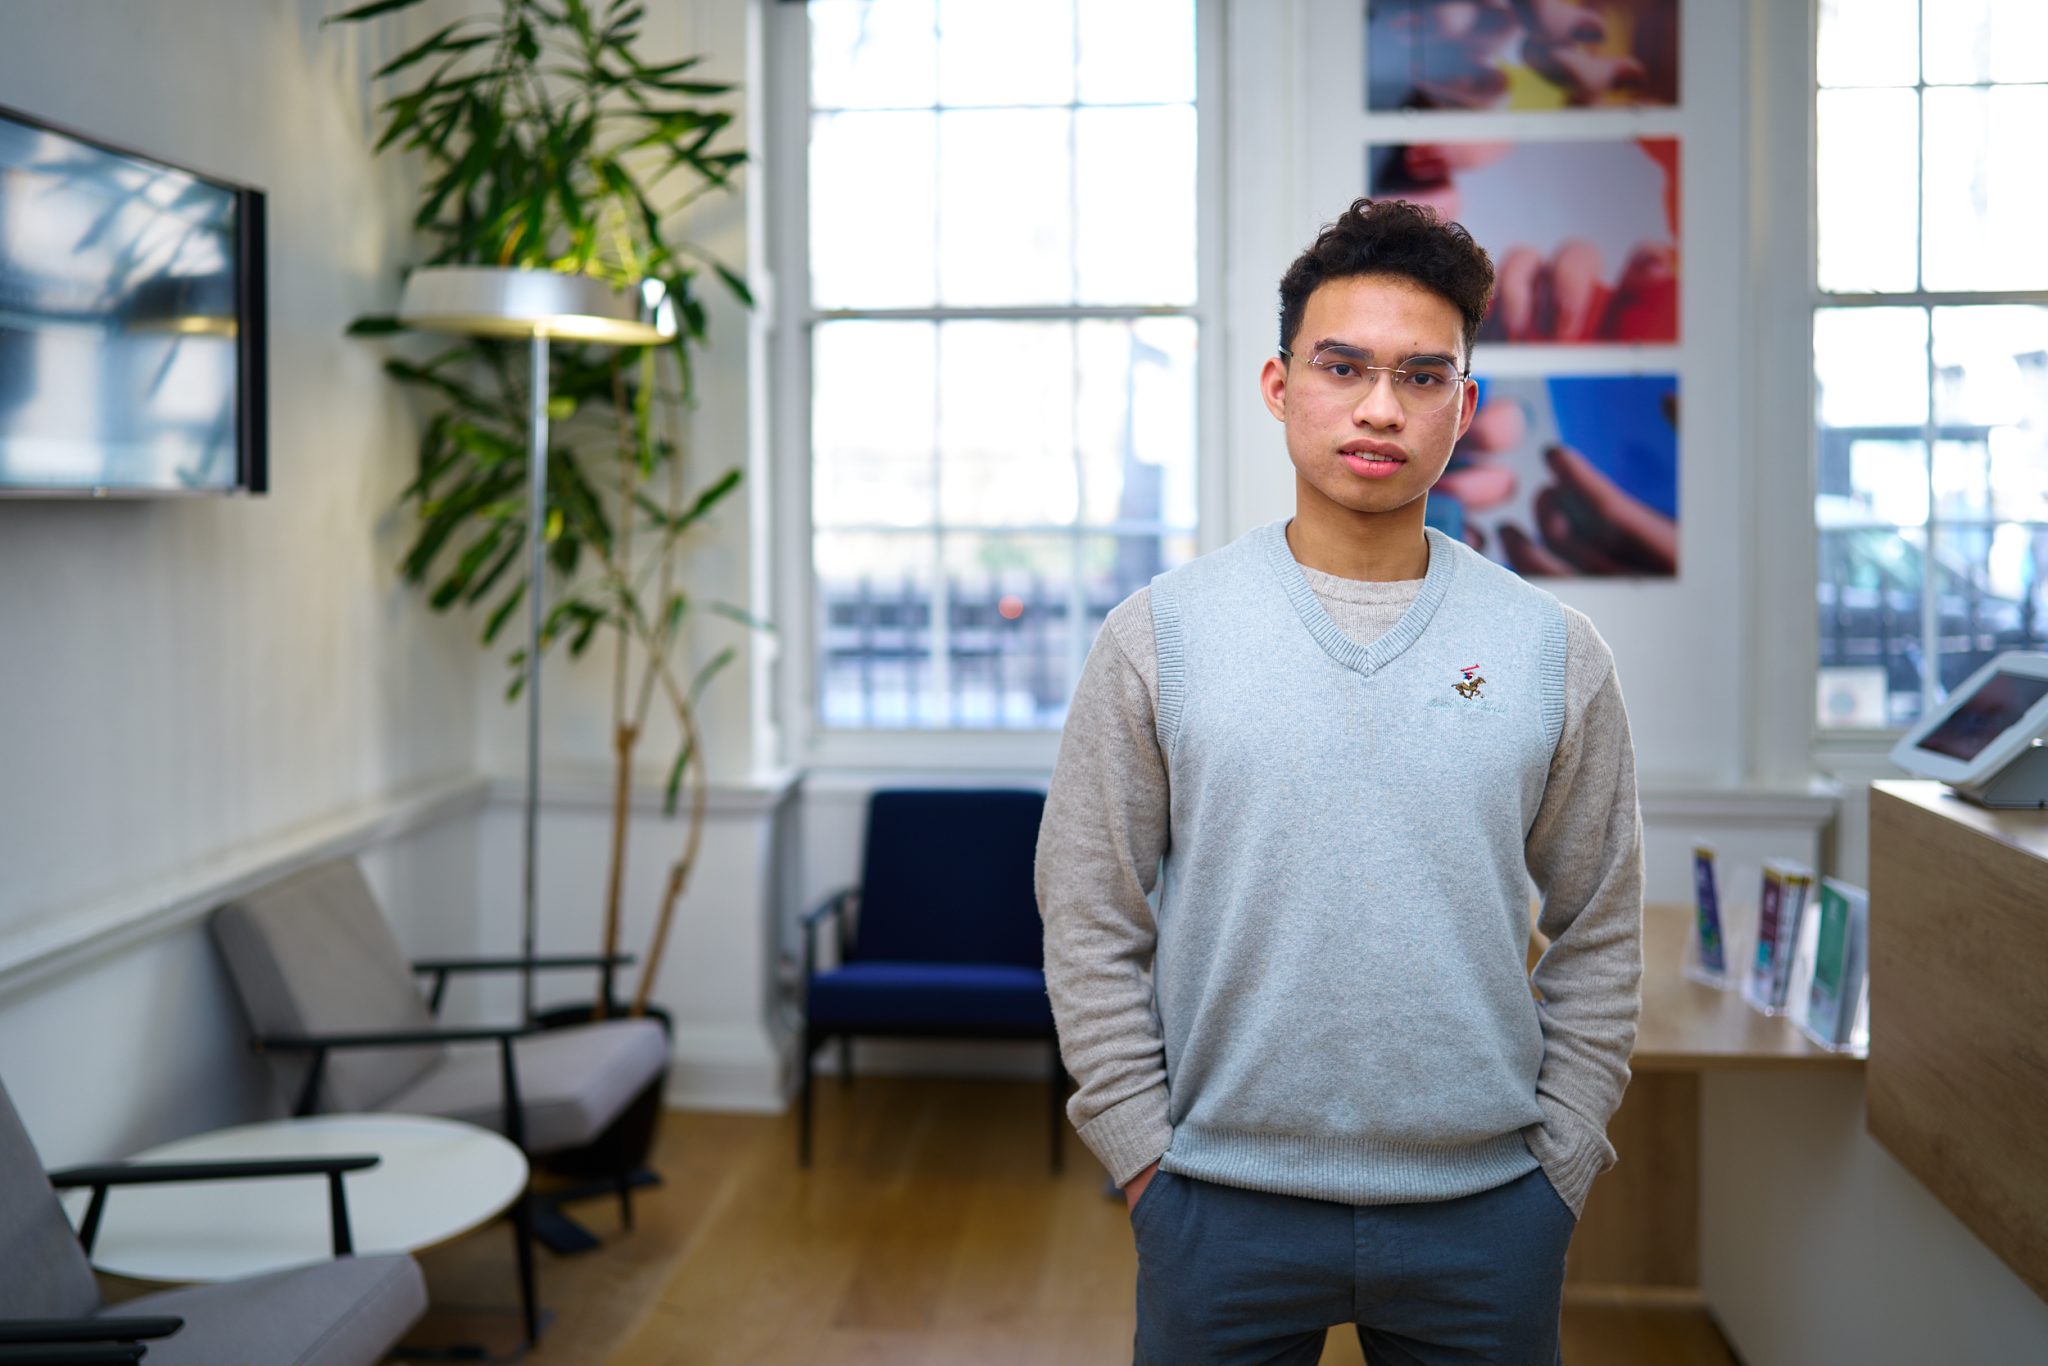 Abdul, from Malaysia, studied UFP Economics, Financial Trading and Maths at Guildhouse School London